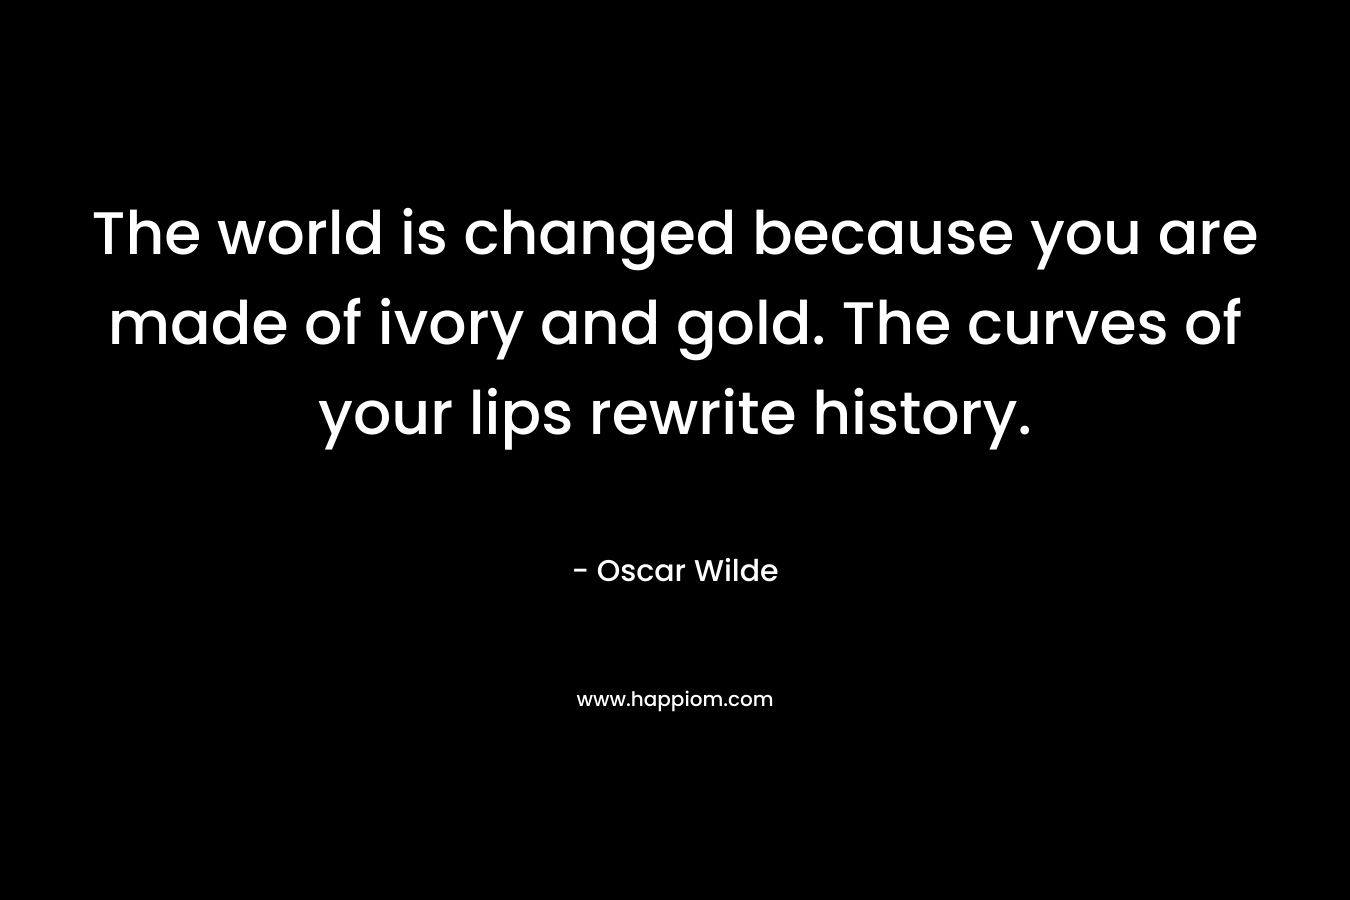 The world is changed because you are made of ivory and gold. The curves of your lips rewrite history. – Oscar Wilde